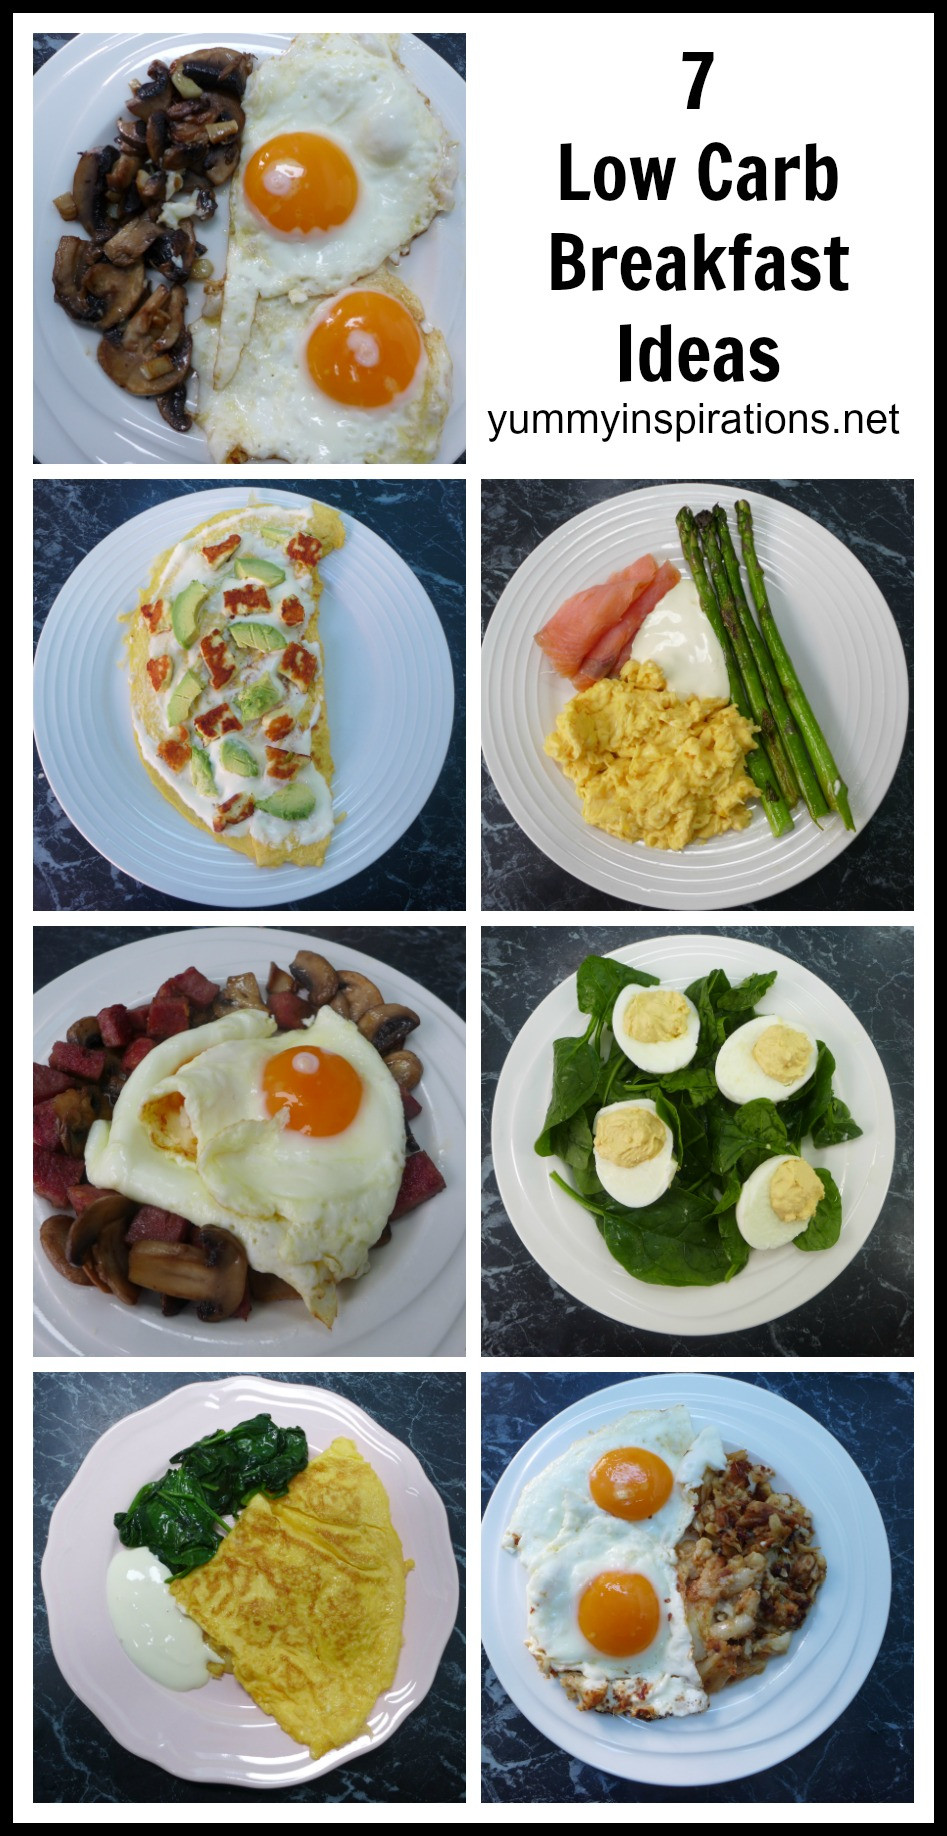 Low Carb Diet Recipes
 7 Low Carb Breakfast Ideas A week of Keto Breakfast Recipes